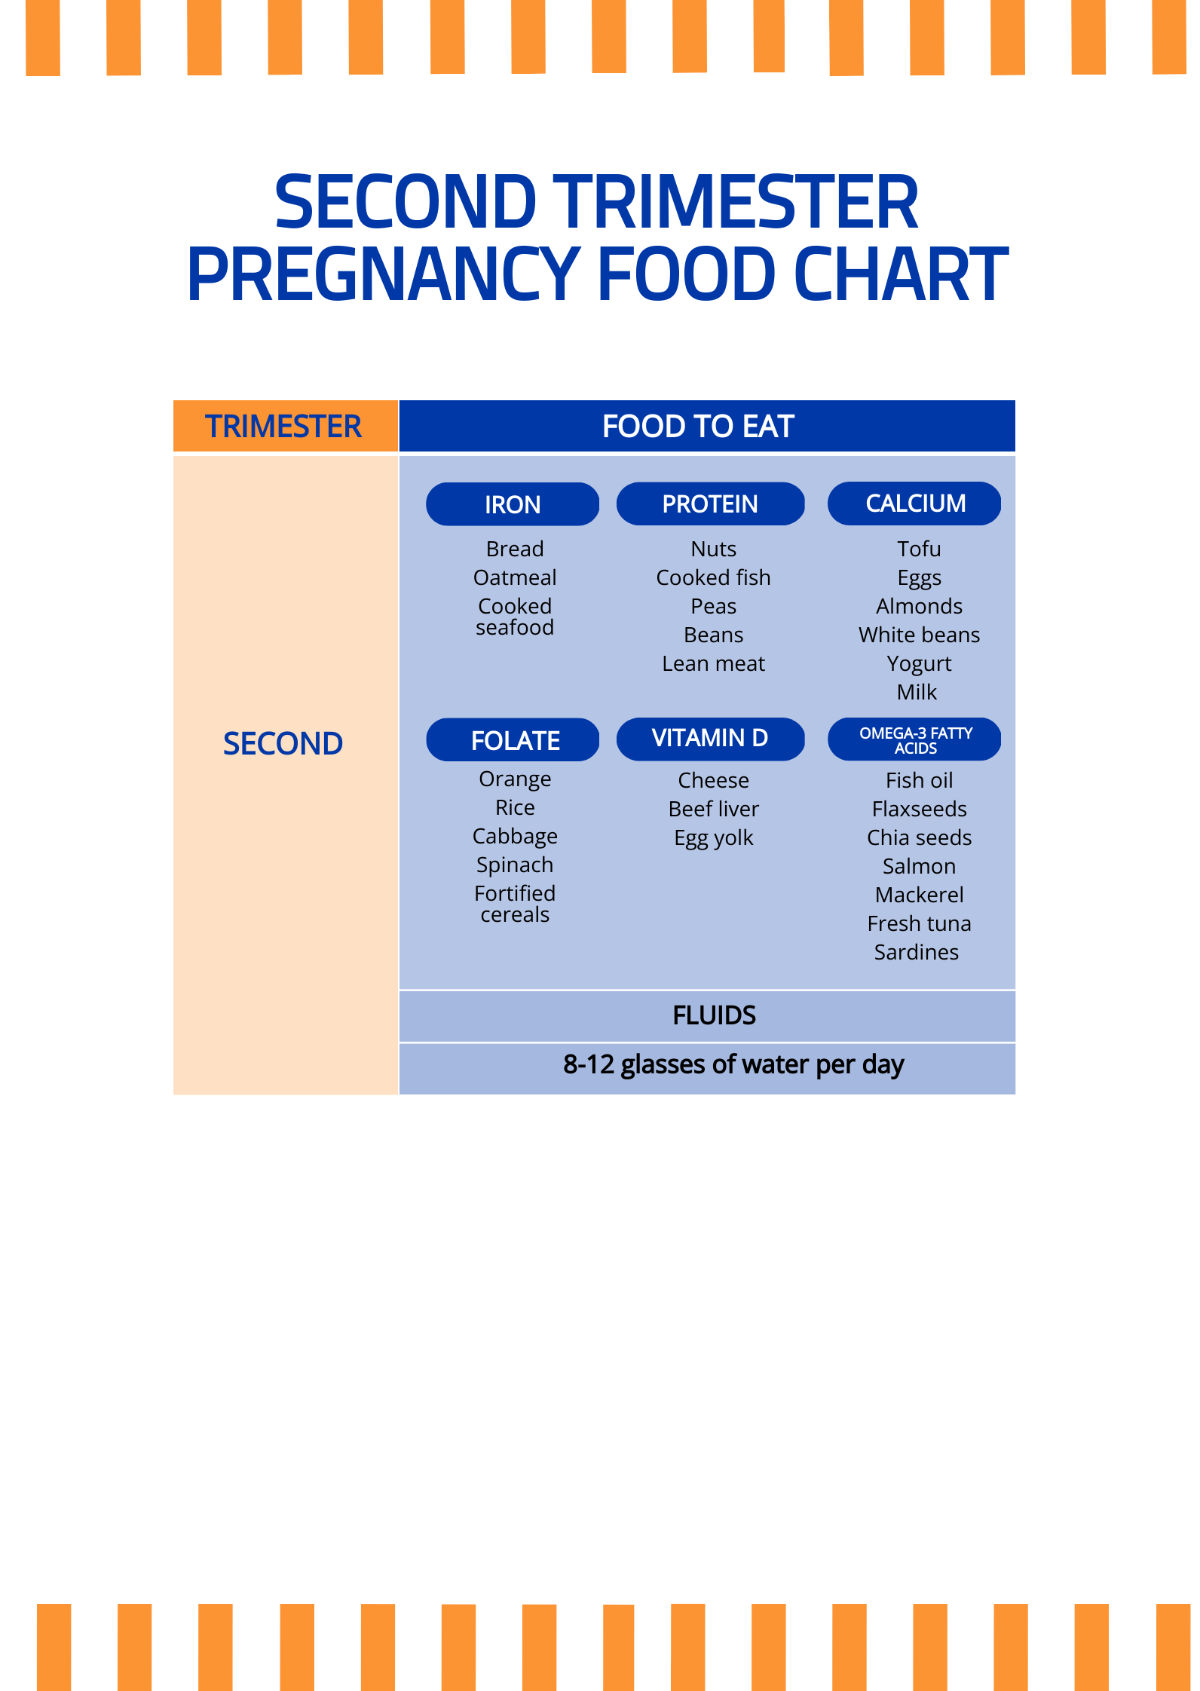 Second Trimester Pregnancy Food Chart